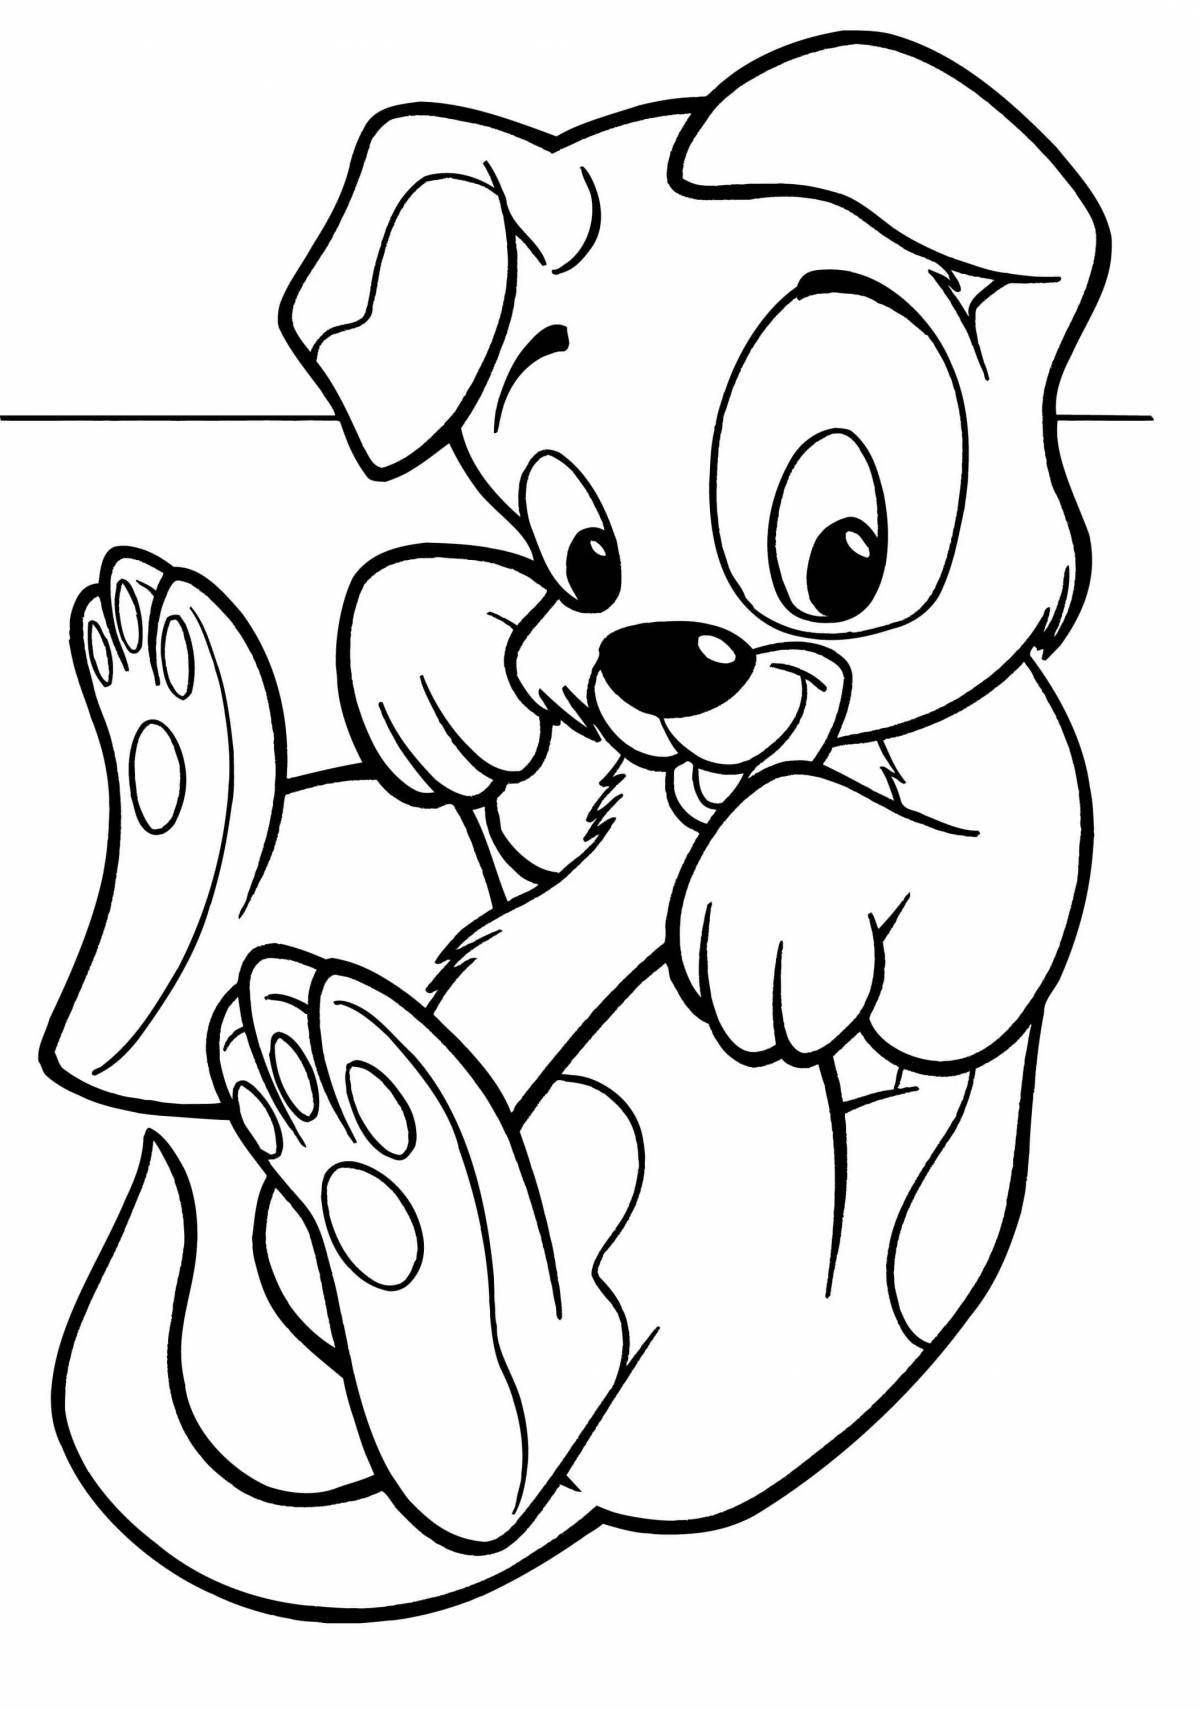 Affectionate dog coloring for boys